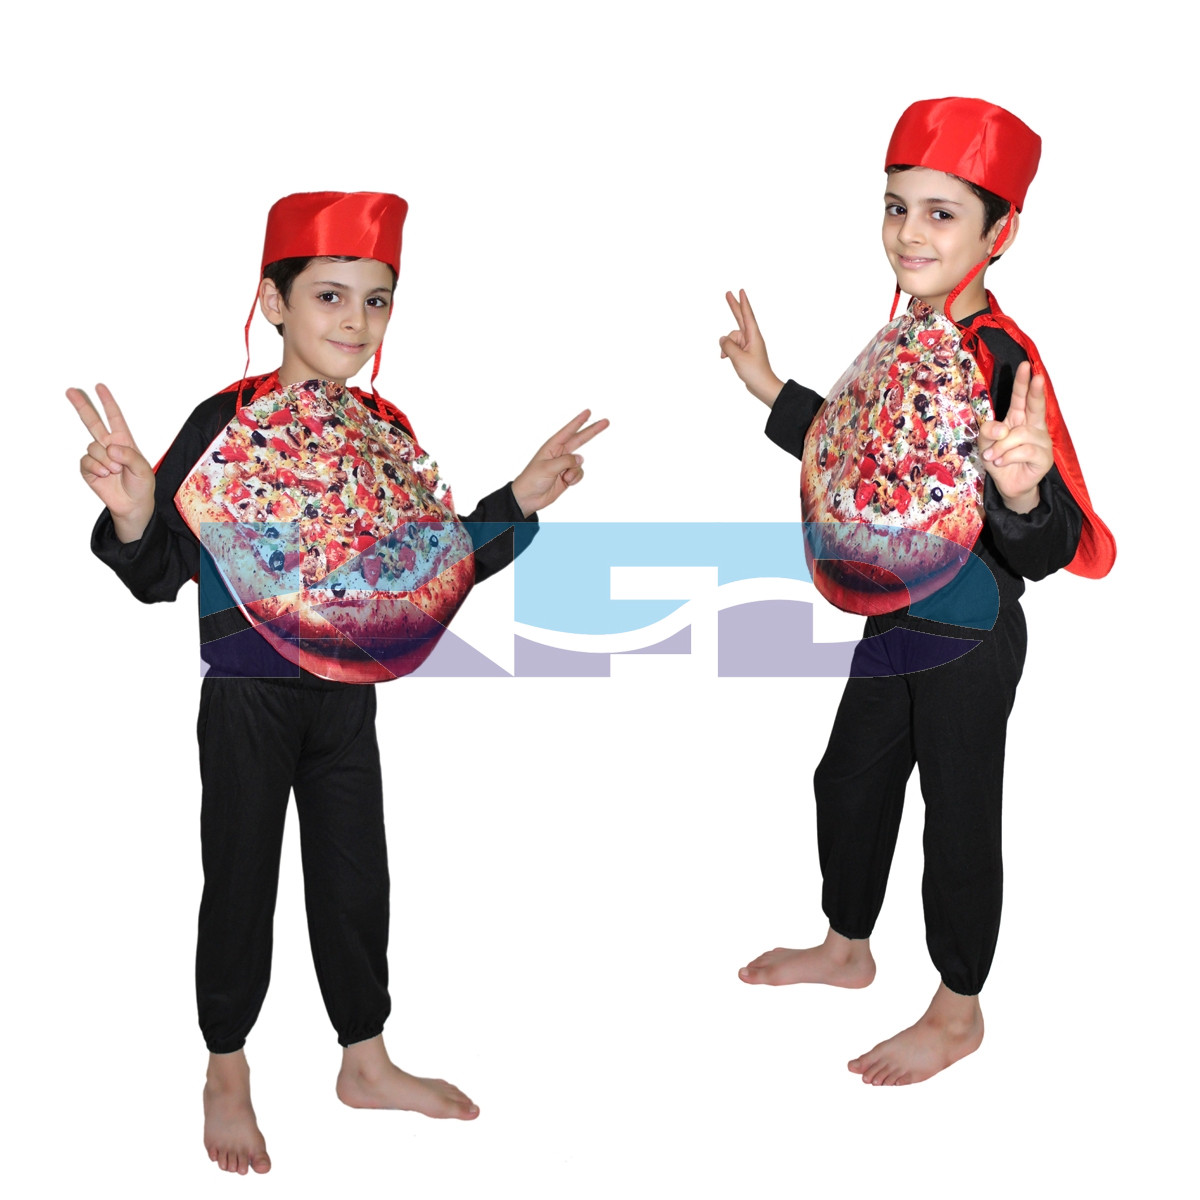 Pizza fancy dress for kids,Object Costume for School Annual function/Theme Party/Competition/Stage Shows Dress